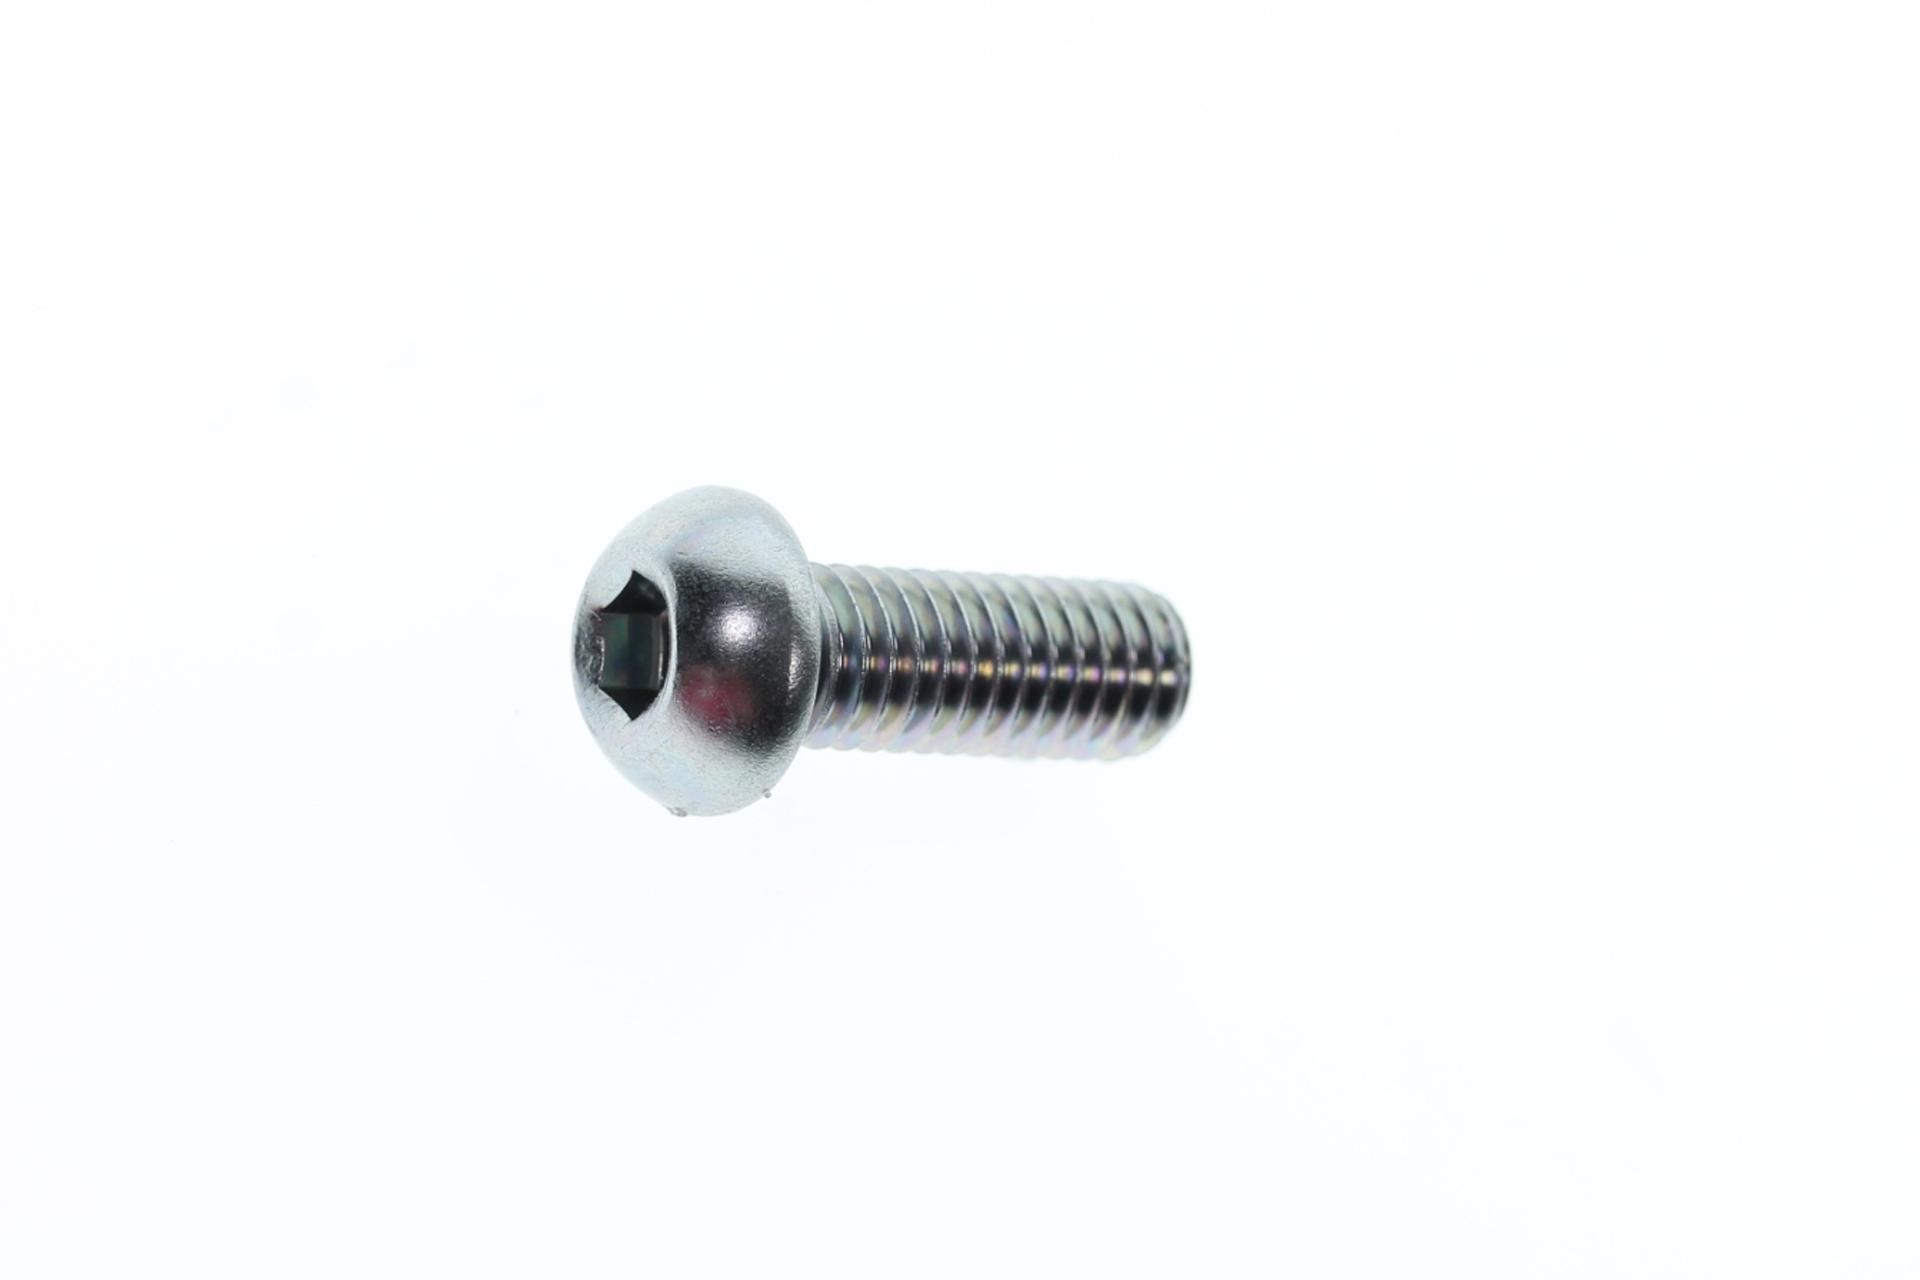 92013-06016-00 Superseded by 92014-06016-00 - BOLT, BUTTON HEAD